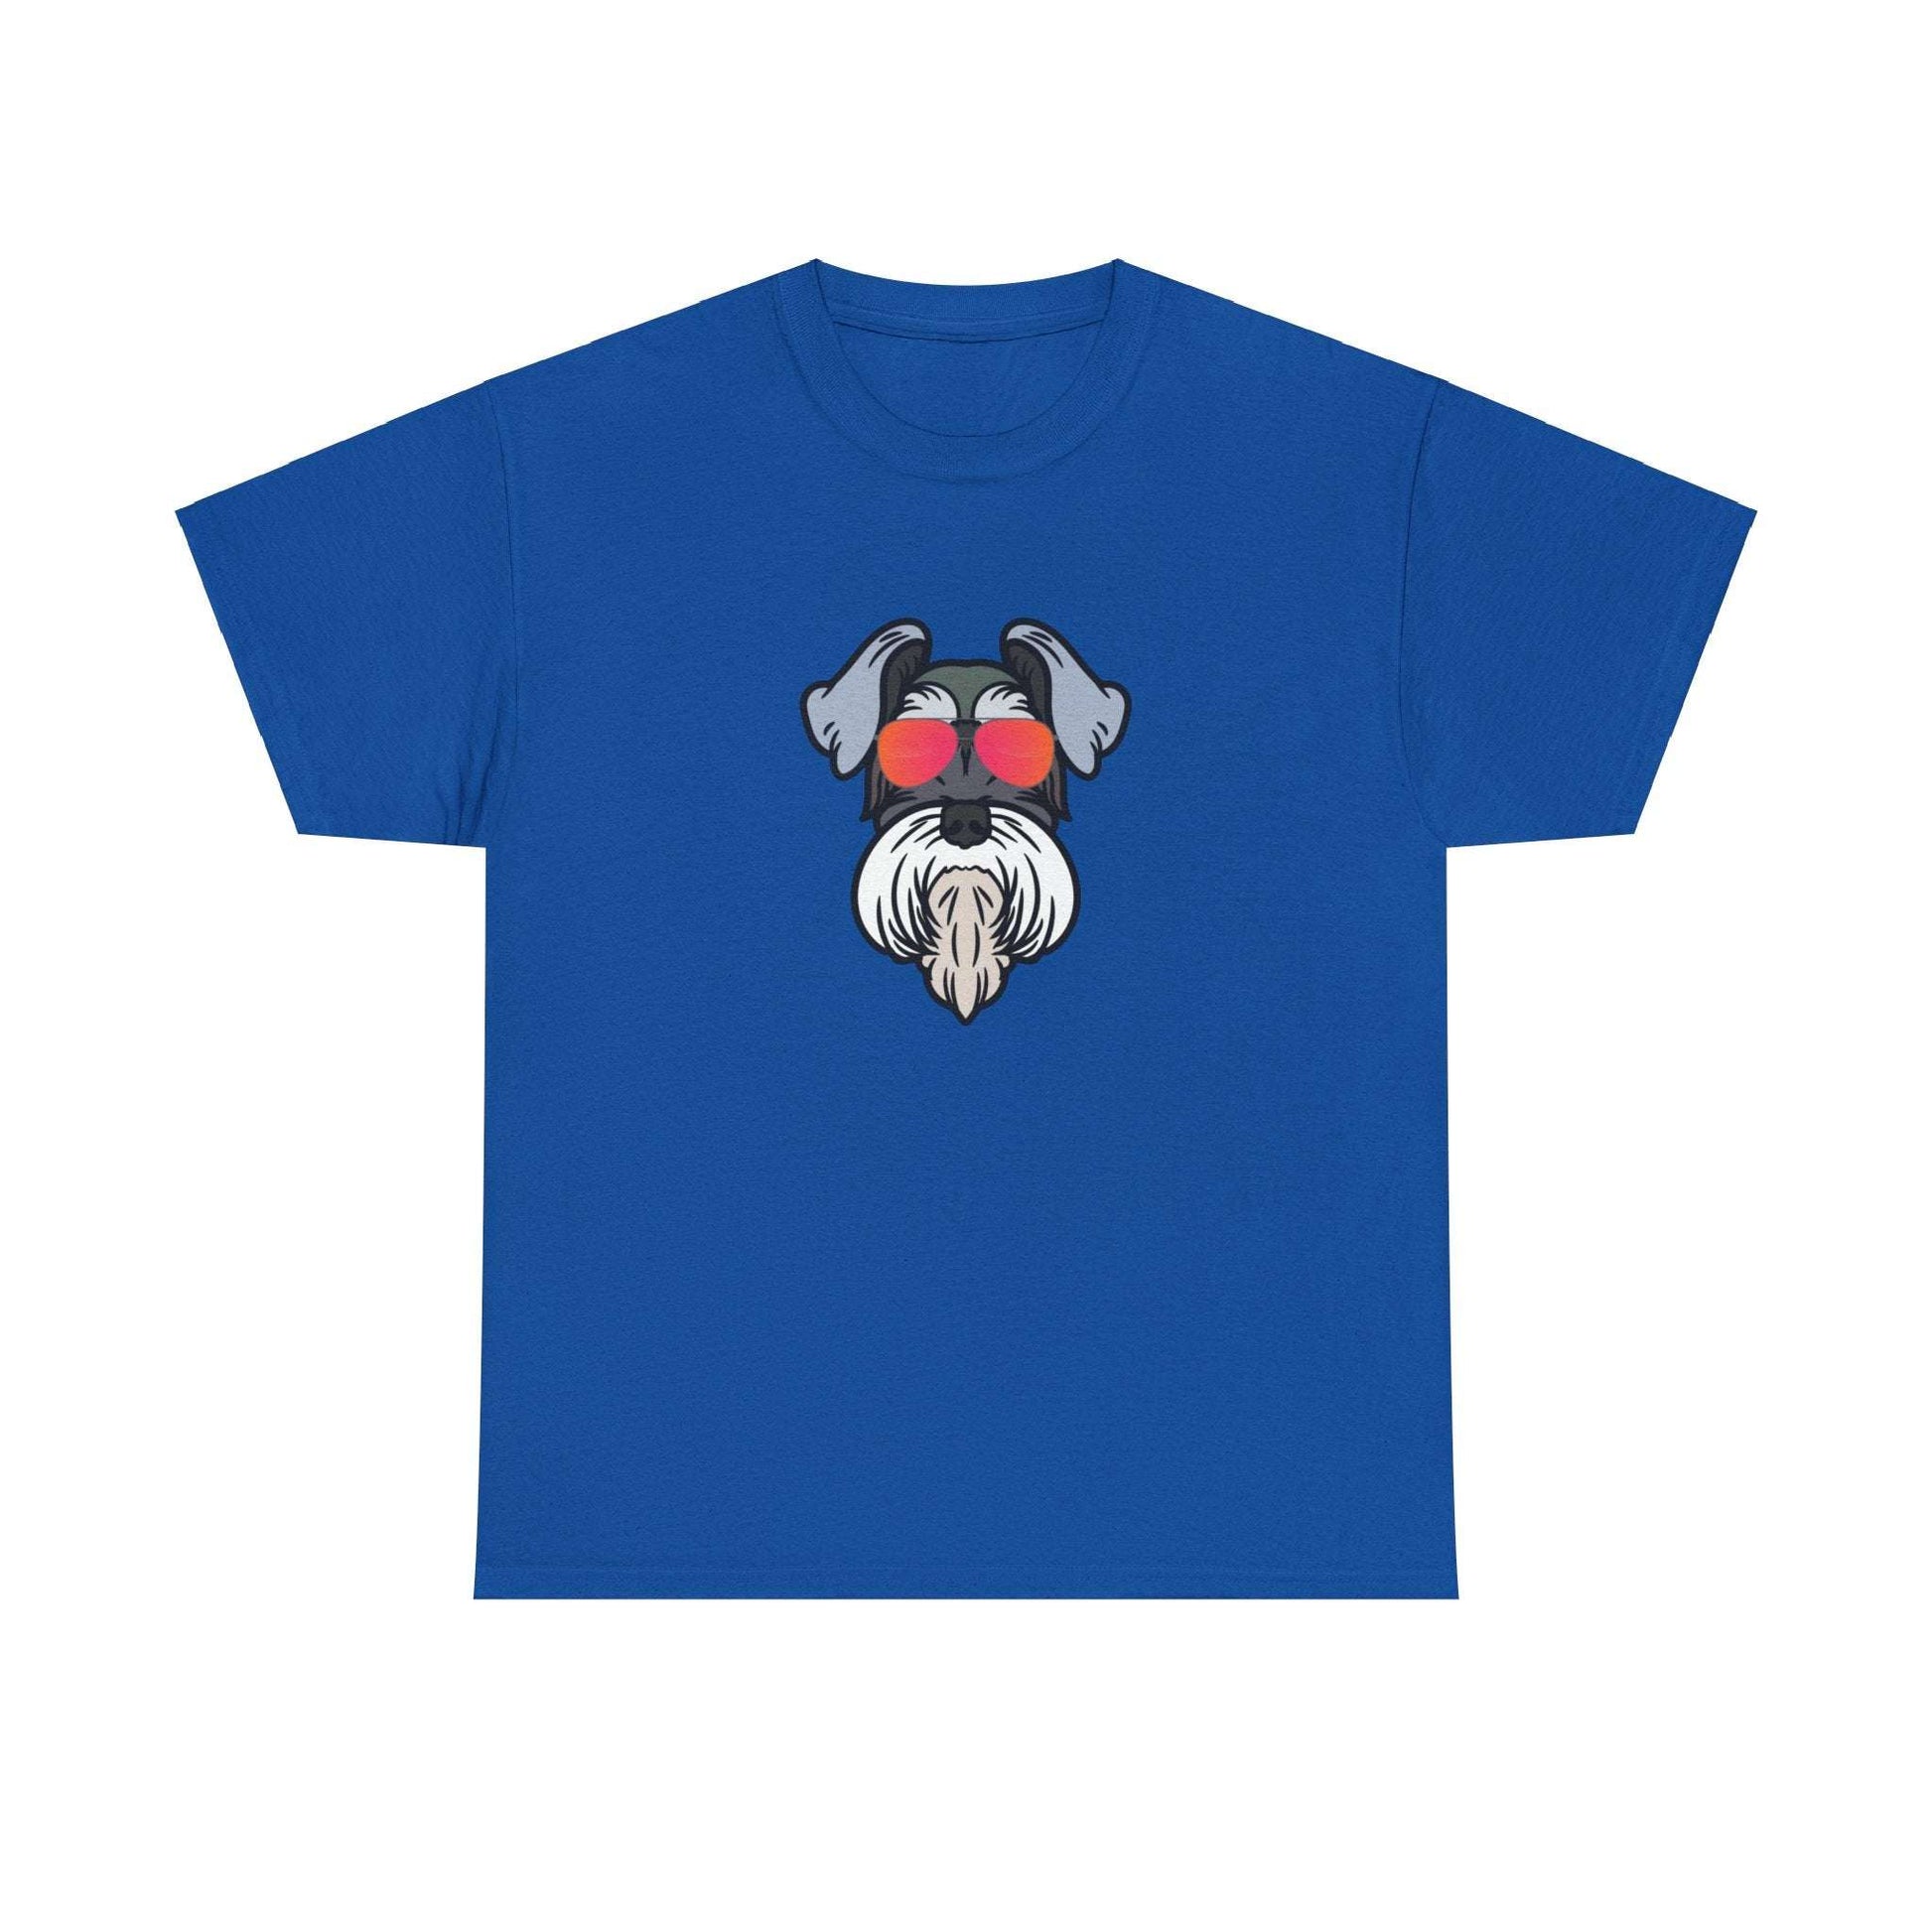 Fabulous Tee Shirts' 'Cool Schnauzer' royal blue t-shirt displayed to emphasize its superior quality.